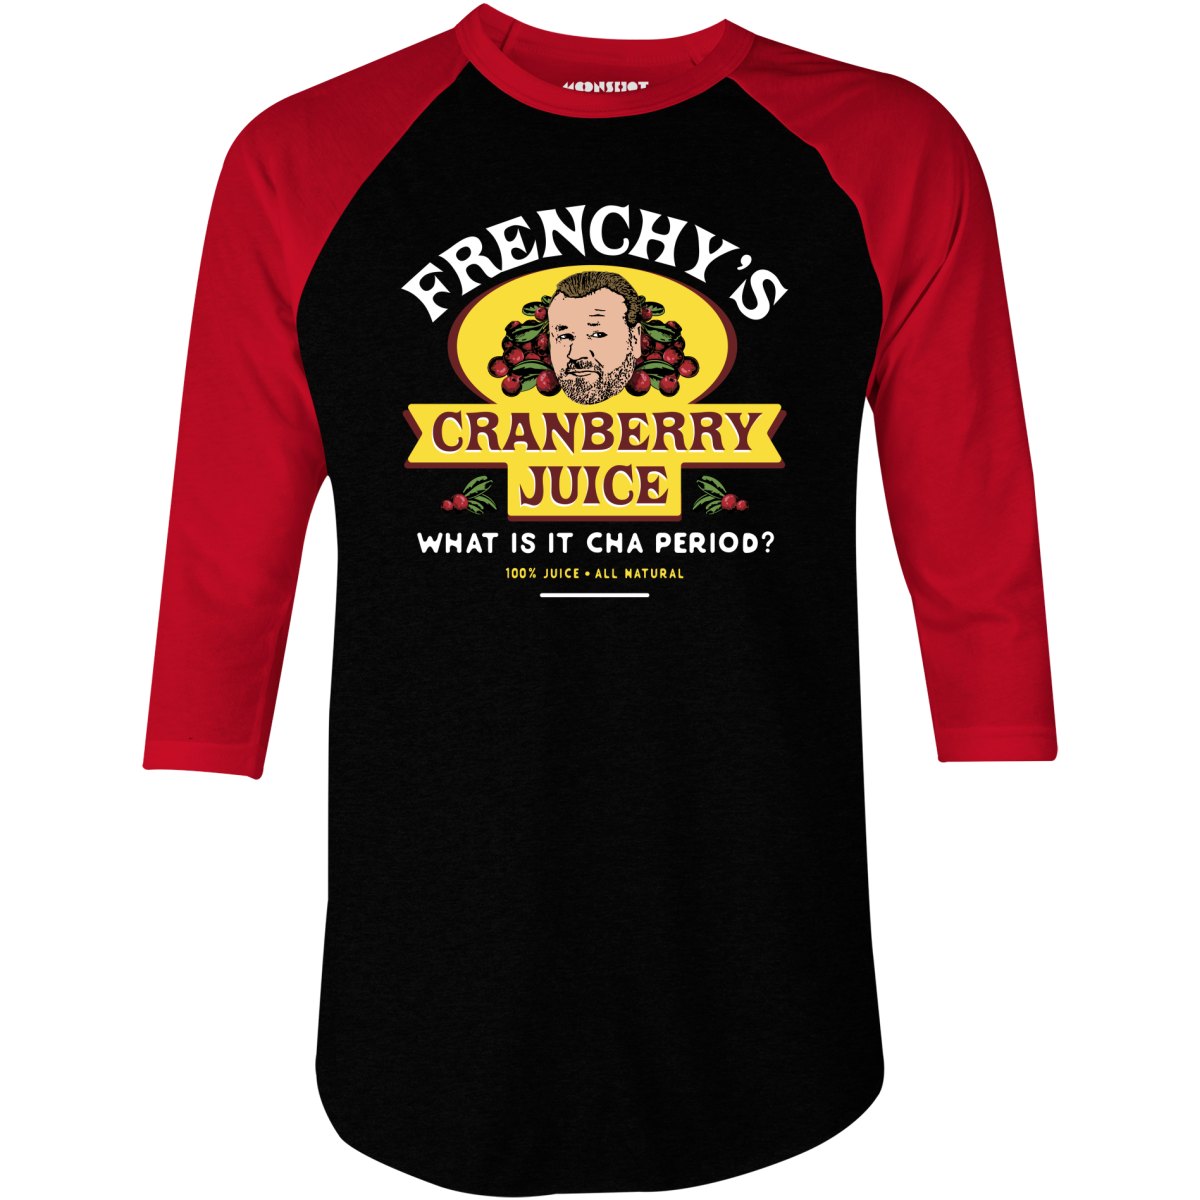 Frenchy's Cranberry Juice - The Departed - 3/4 Sleeve Raglan T-Shirt